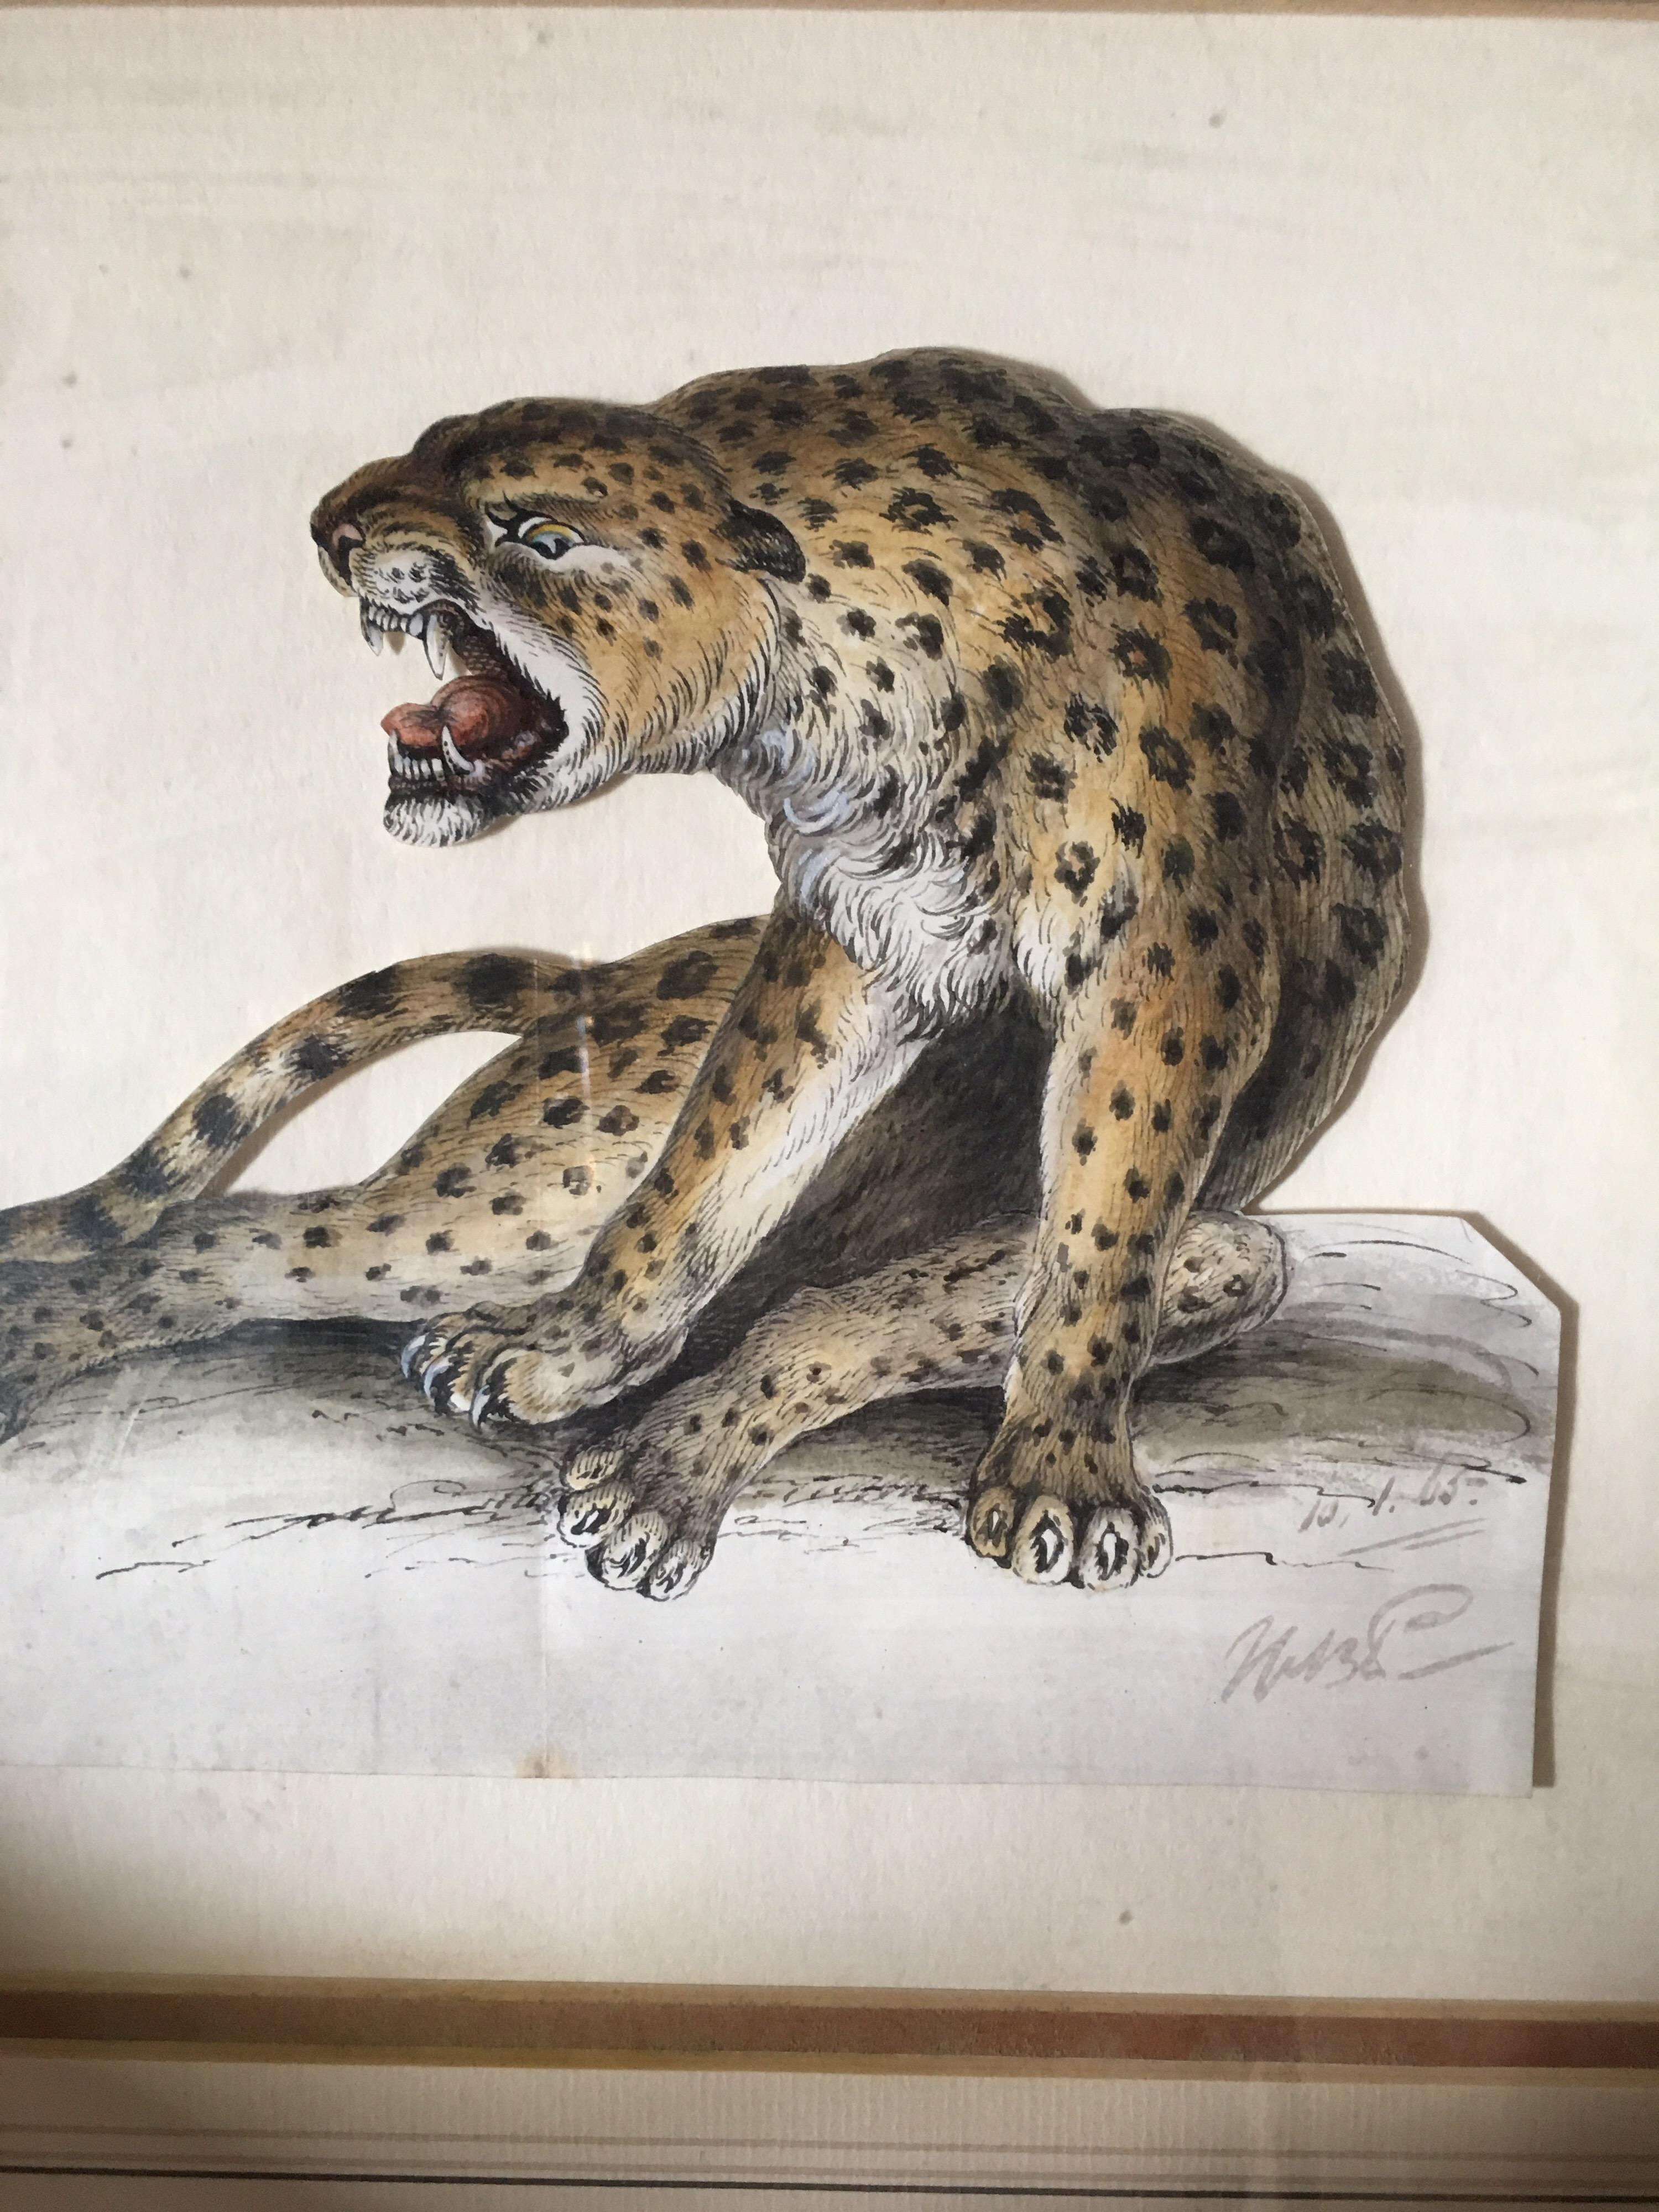 Cheetah Antique Watercolour, British Artist, Original Painting
By British artist, early 20th Century
Signed indistinctly on the lower right hand corner
Watercolour and Pencil, cut out and attached to board, framed
Framed size: 15 x 17